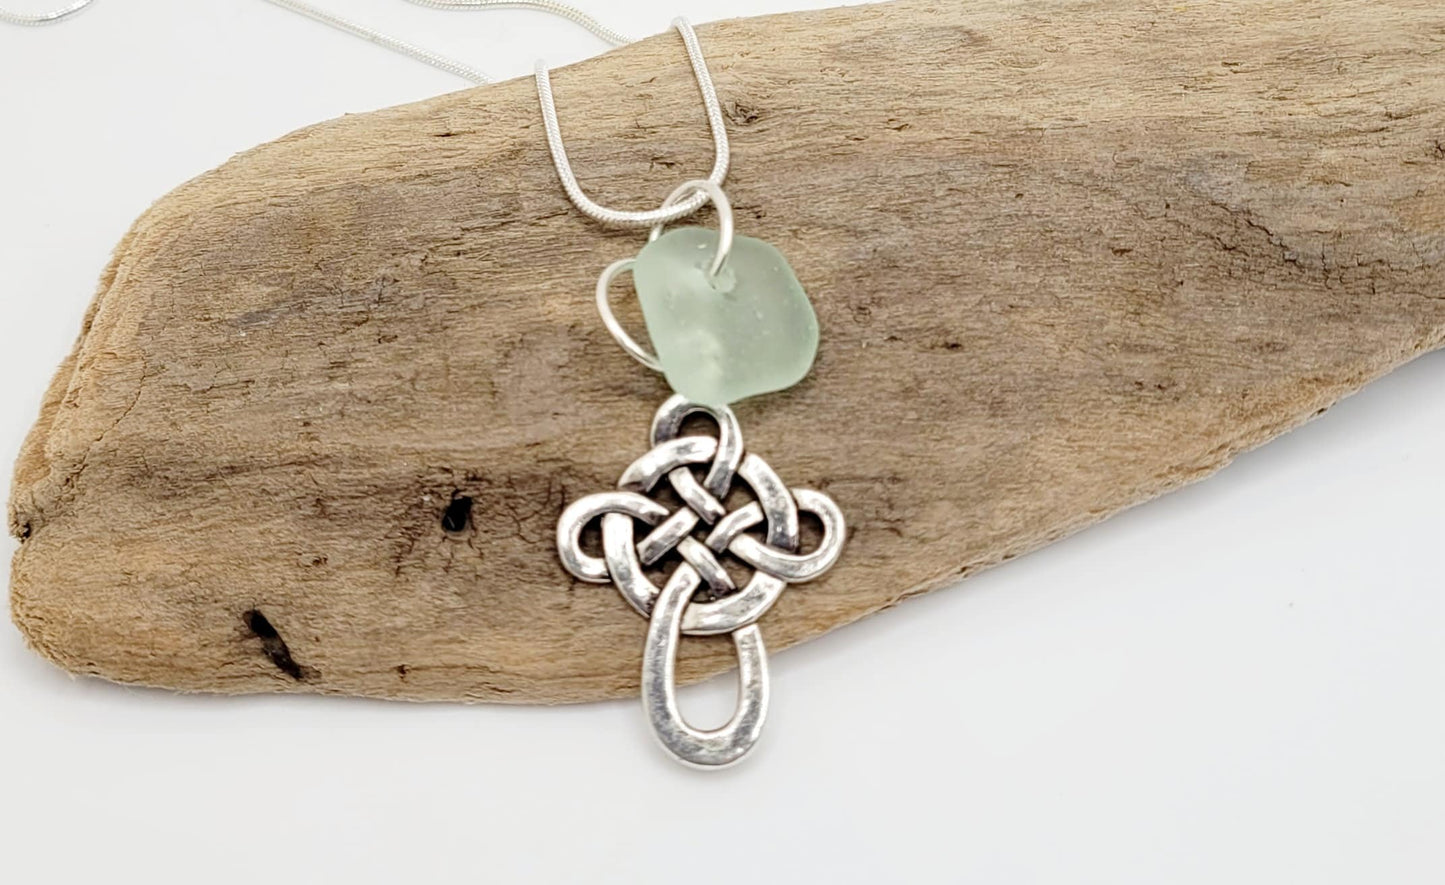 Sea Glass Necklace/St. Patrick's Day Necklace/Celtic Cross Necklace/Genuine Sea Glass/Irish Necklace/GoodMade to Order/148